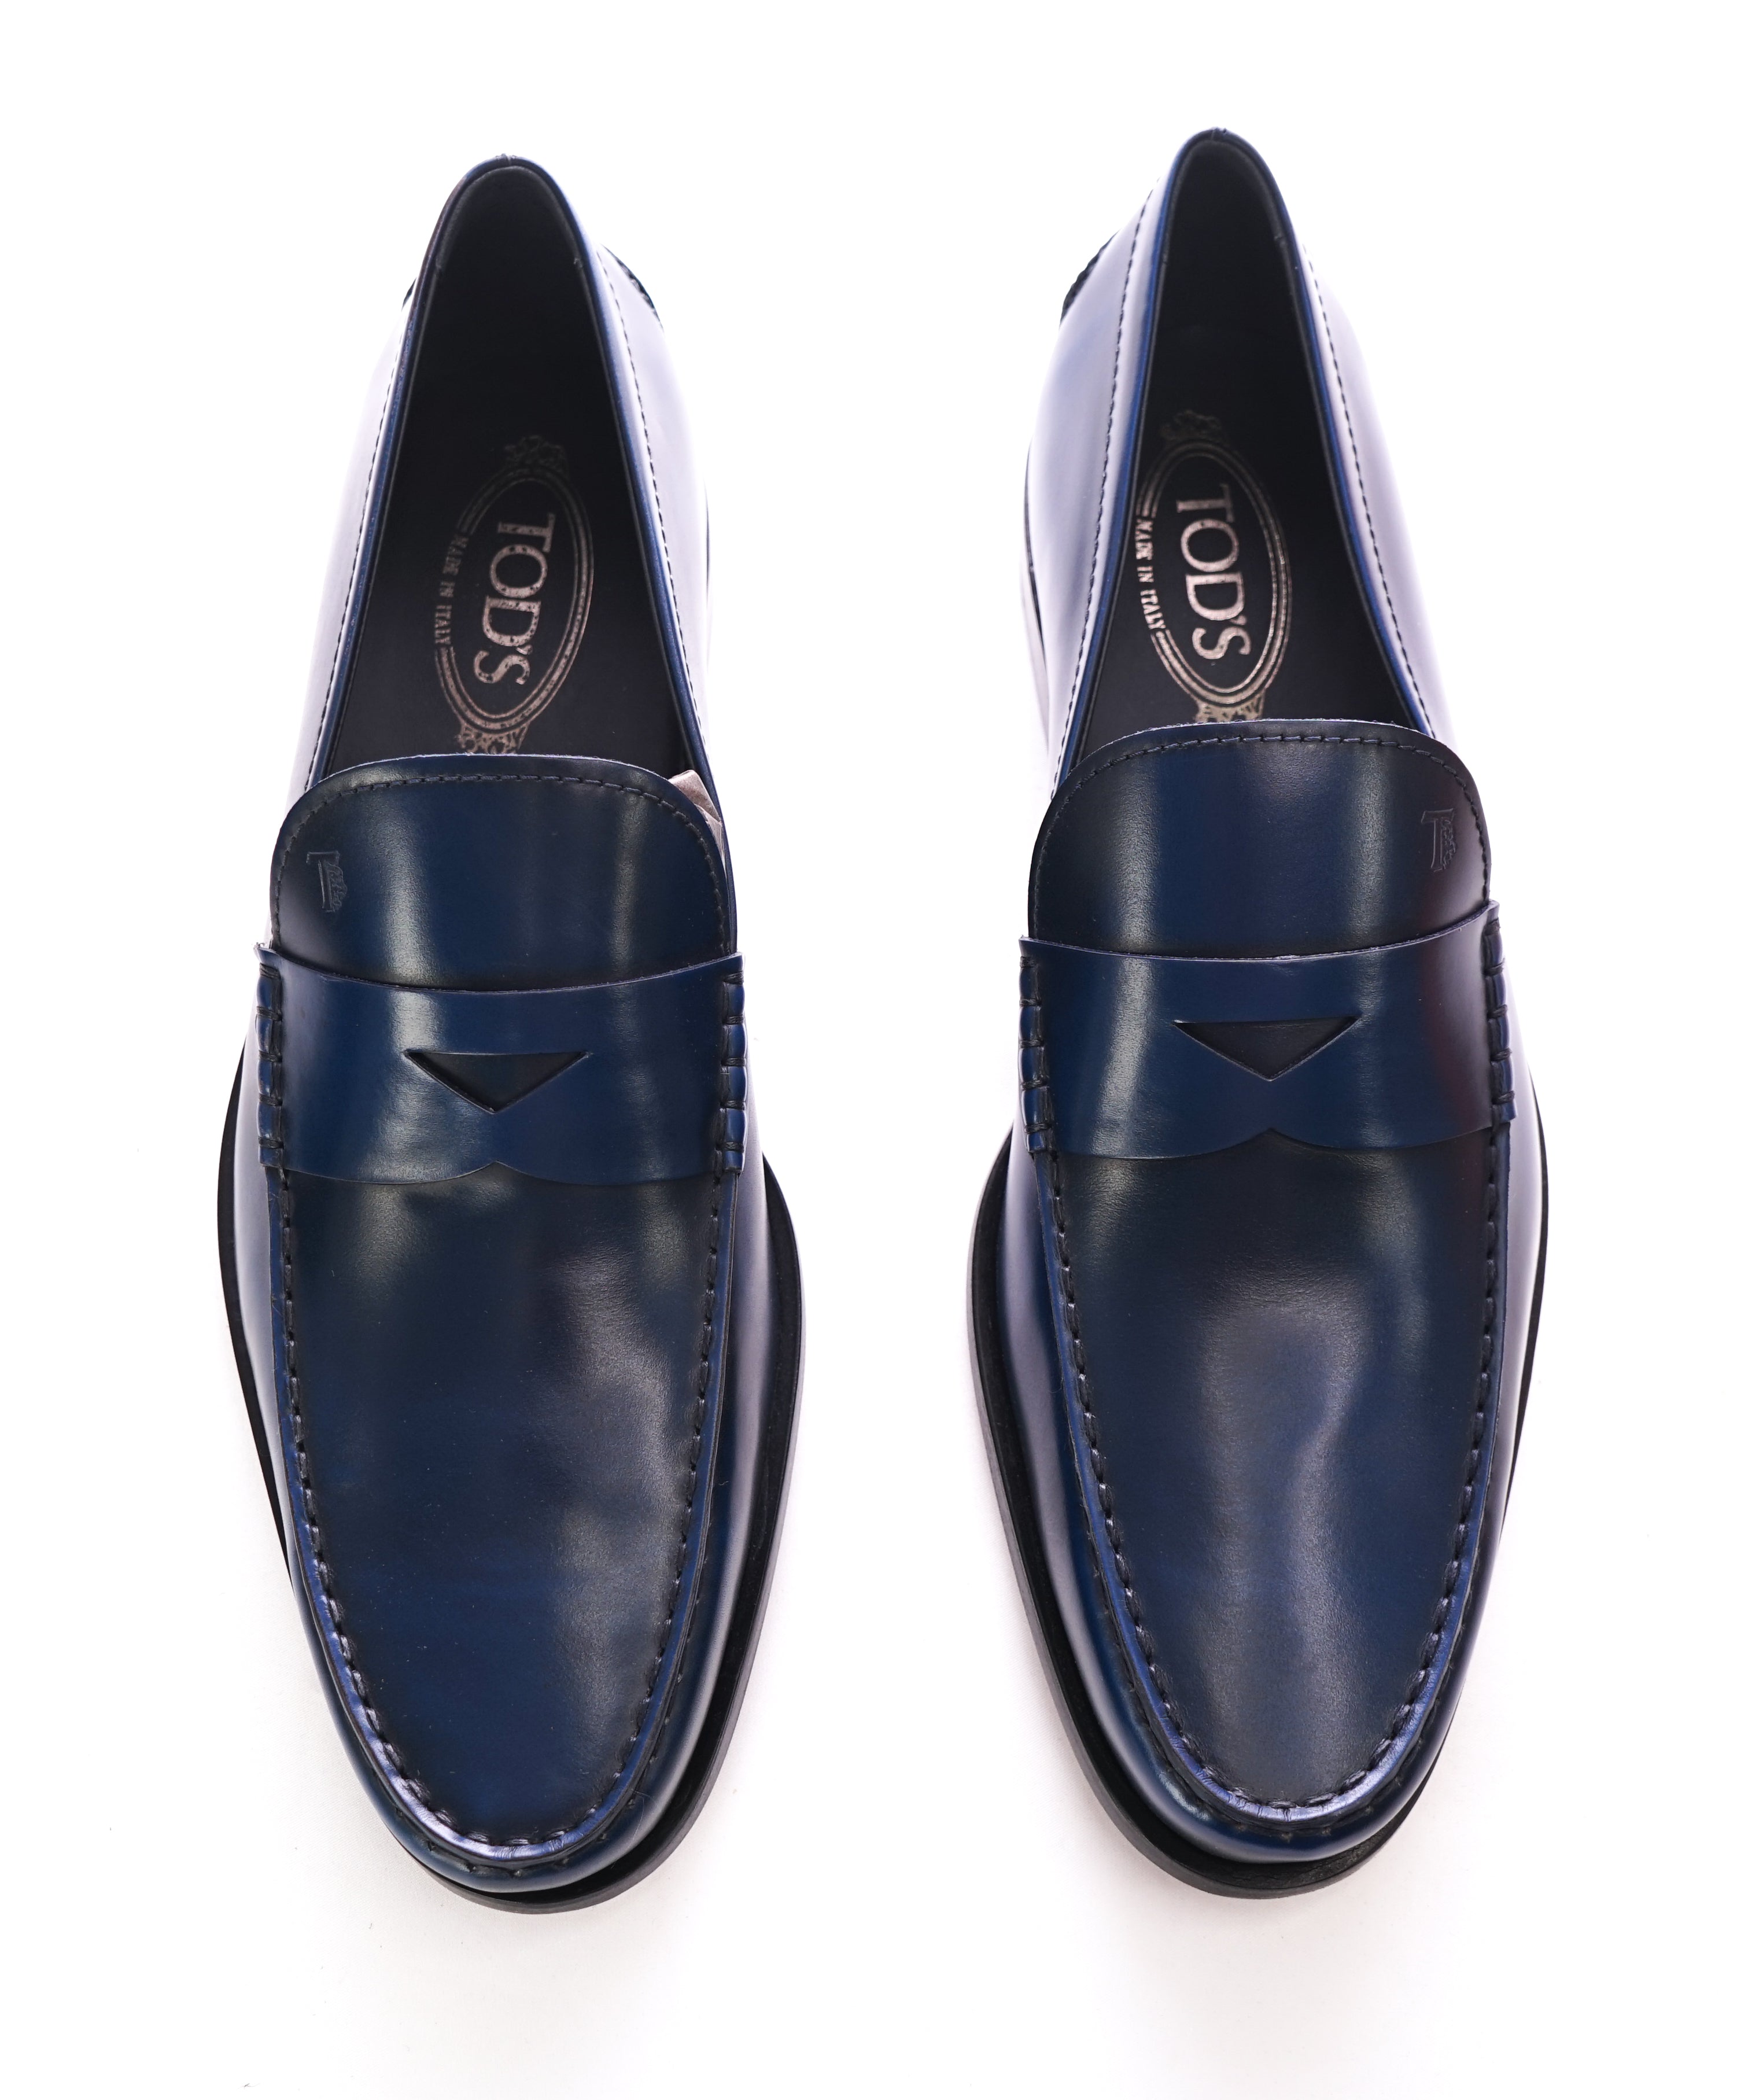 blue leather penny loafers